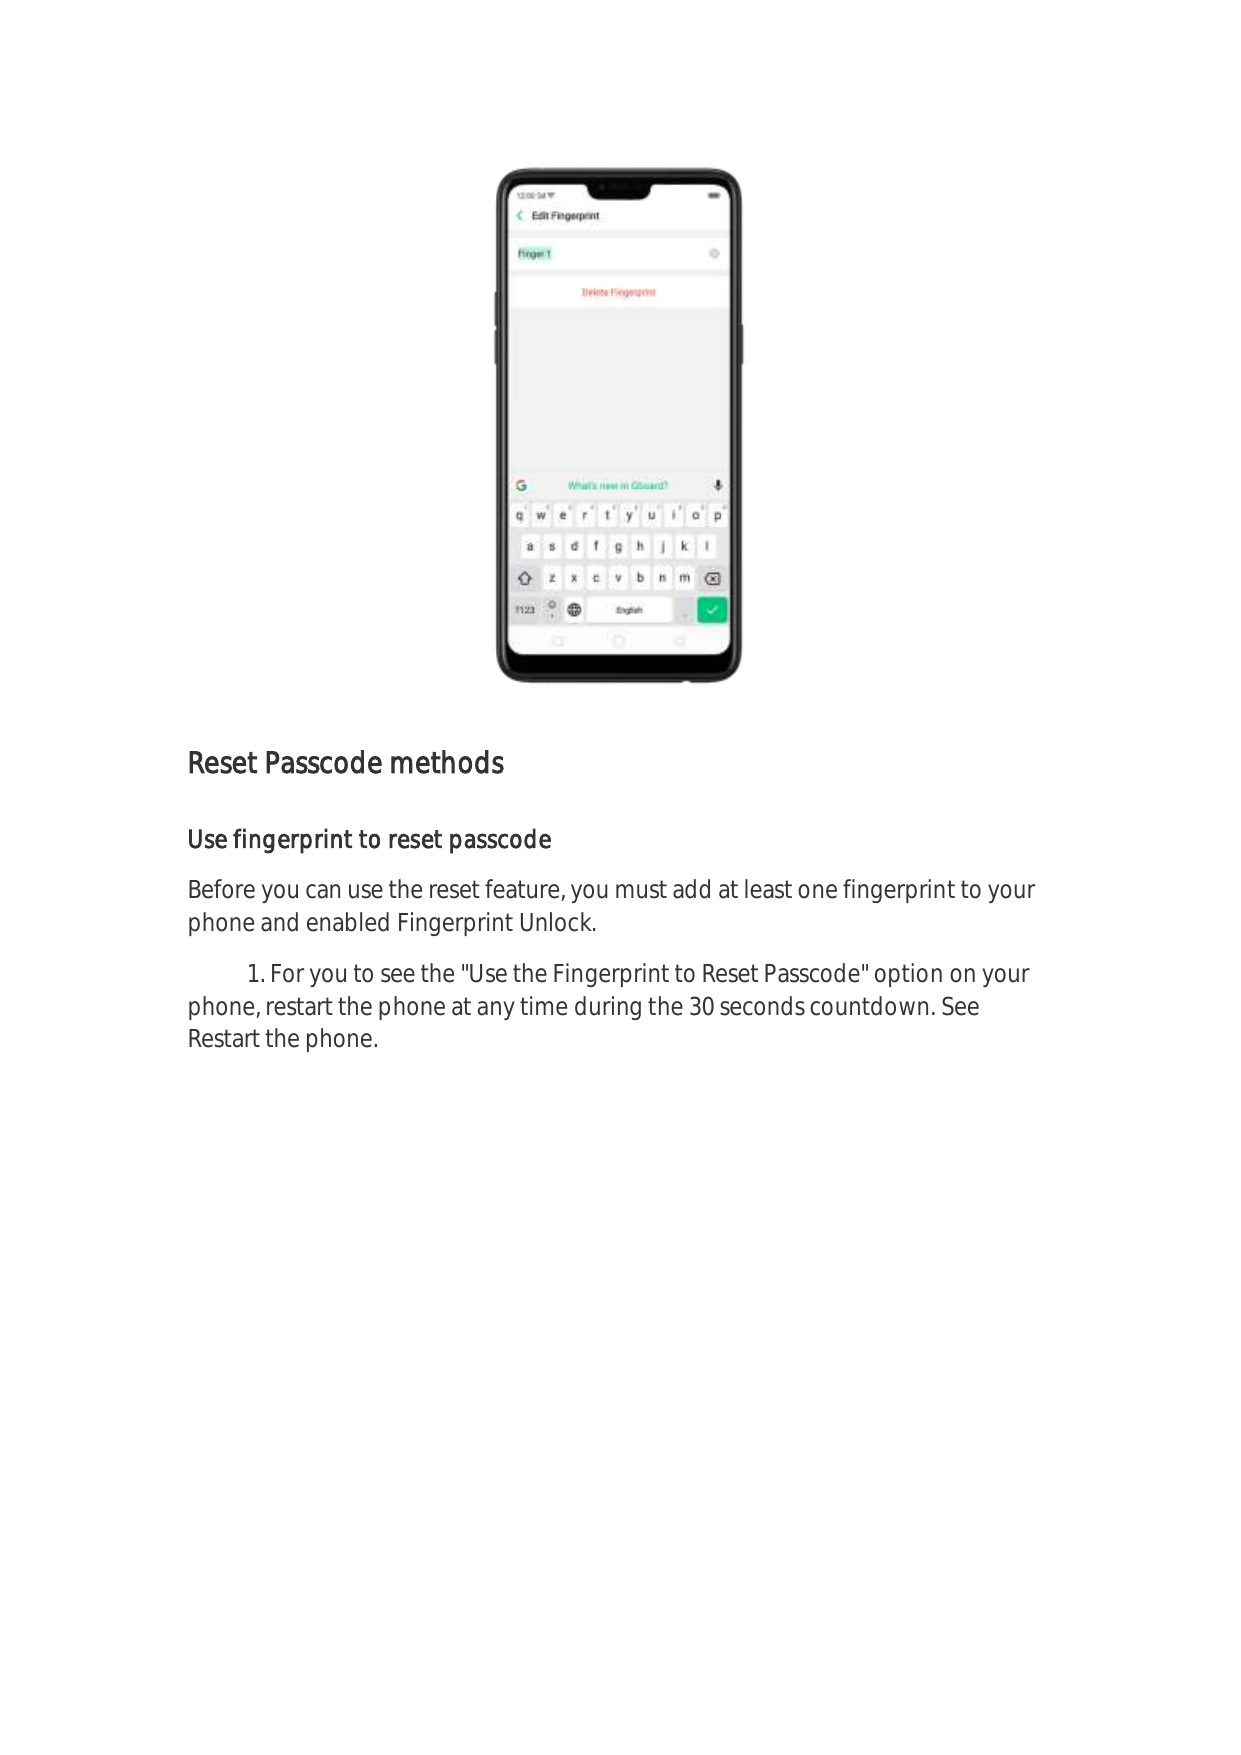 Reset Passcode methodsUse fingerprint to reset passcodeBefore you can use the reset feature, you must add at least one fingerpri